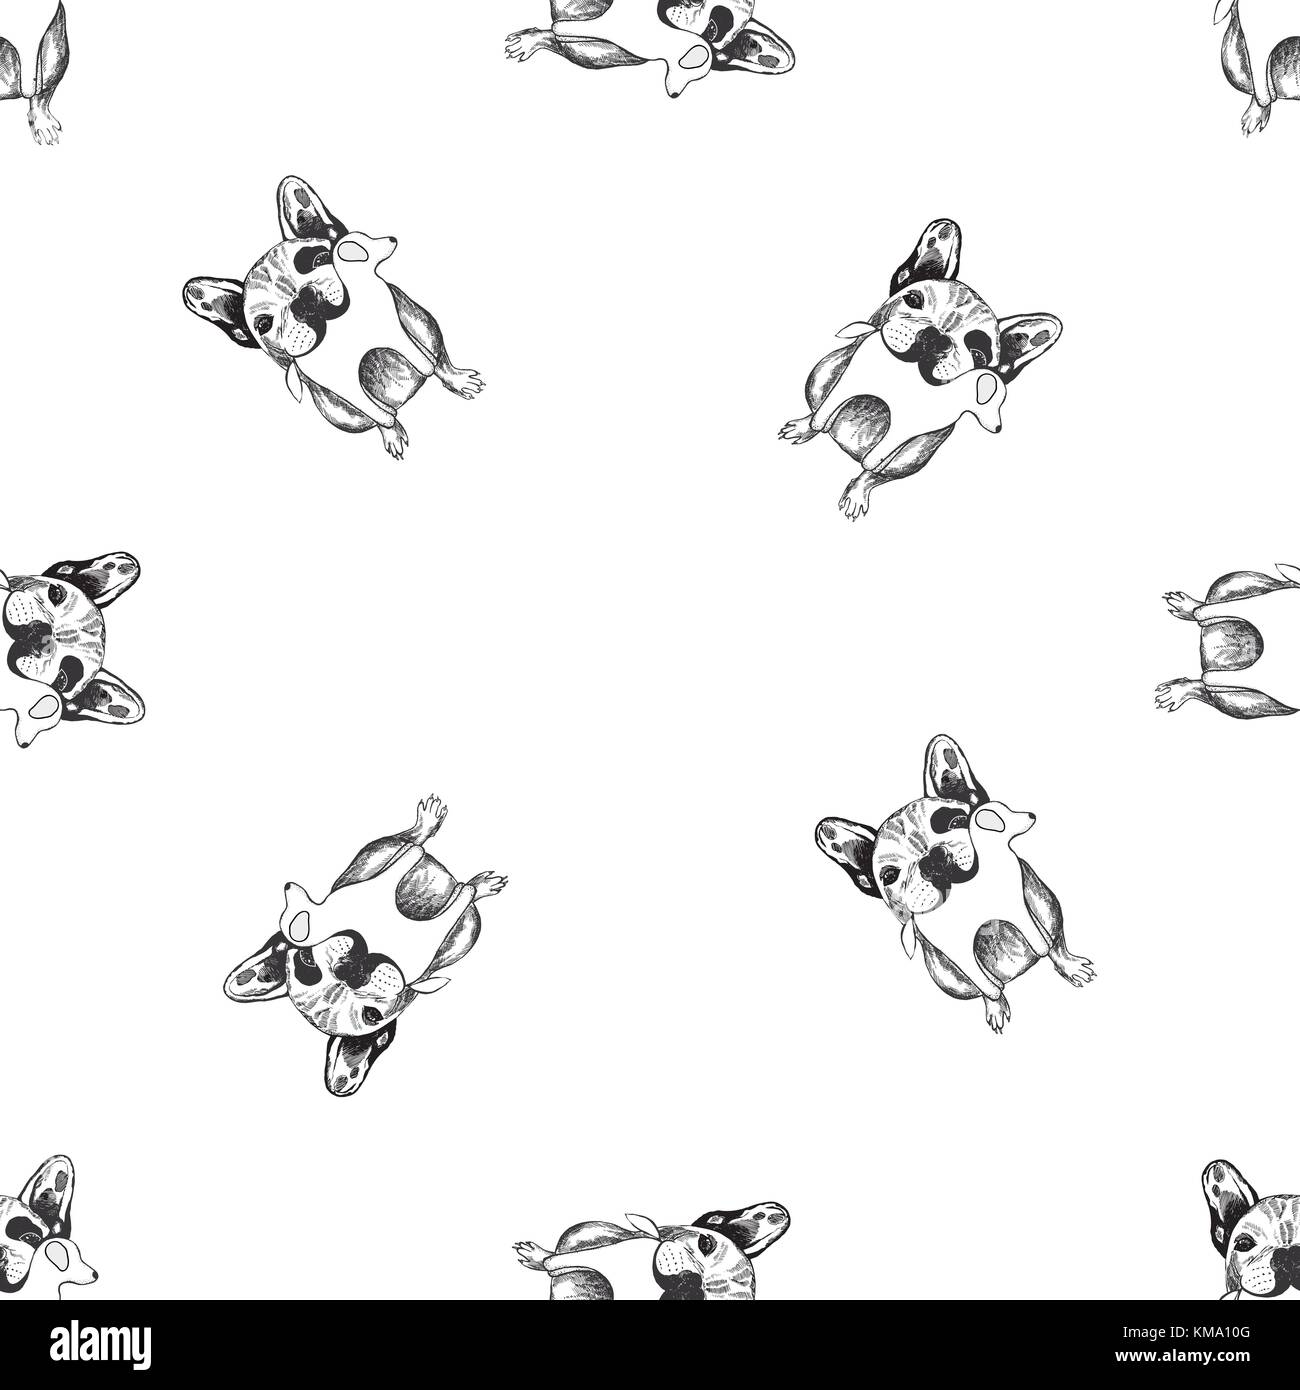 Seamless pattern of hand drawn sketch style bulldogs. Vector illustration isolated on white background. Stock Vector